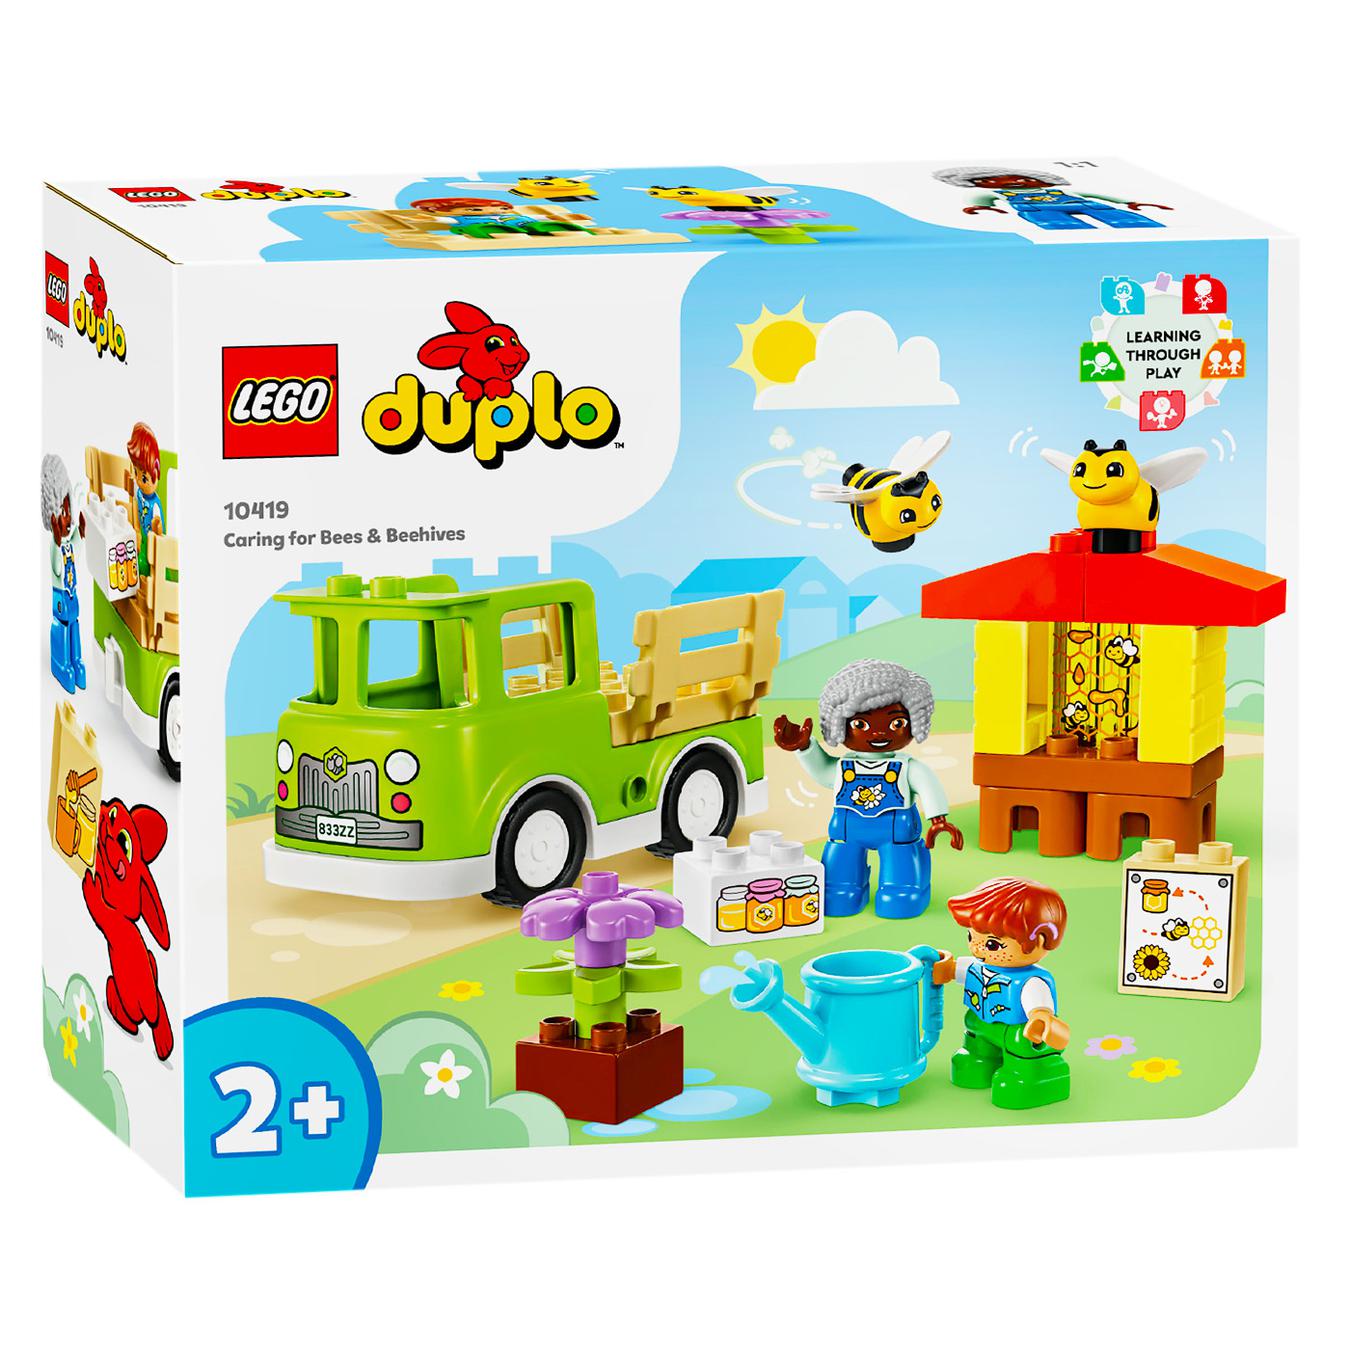 Constructor LEGO Duplo 10419 Caring for bees and hives